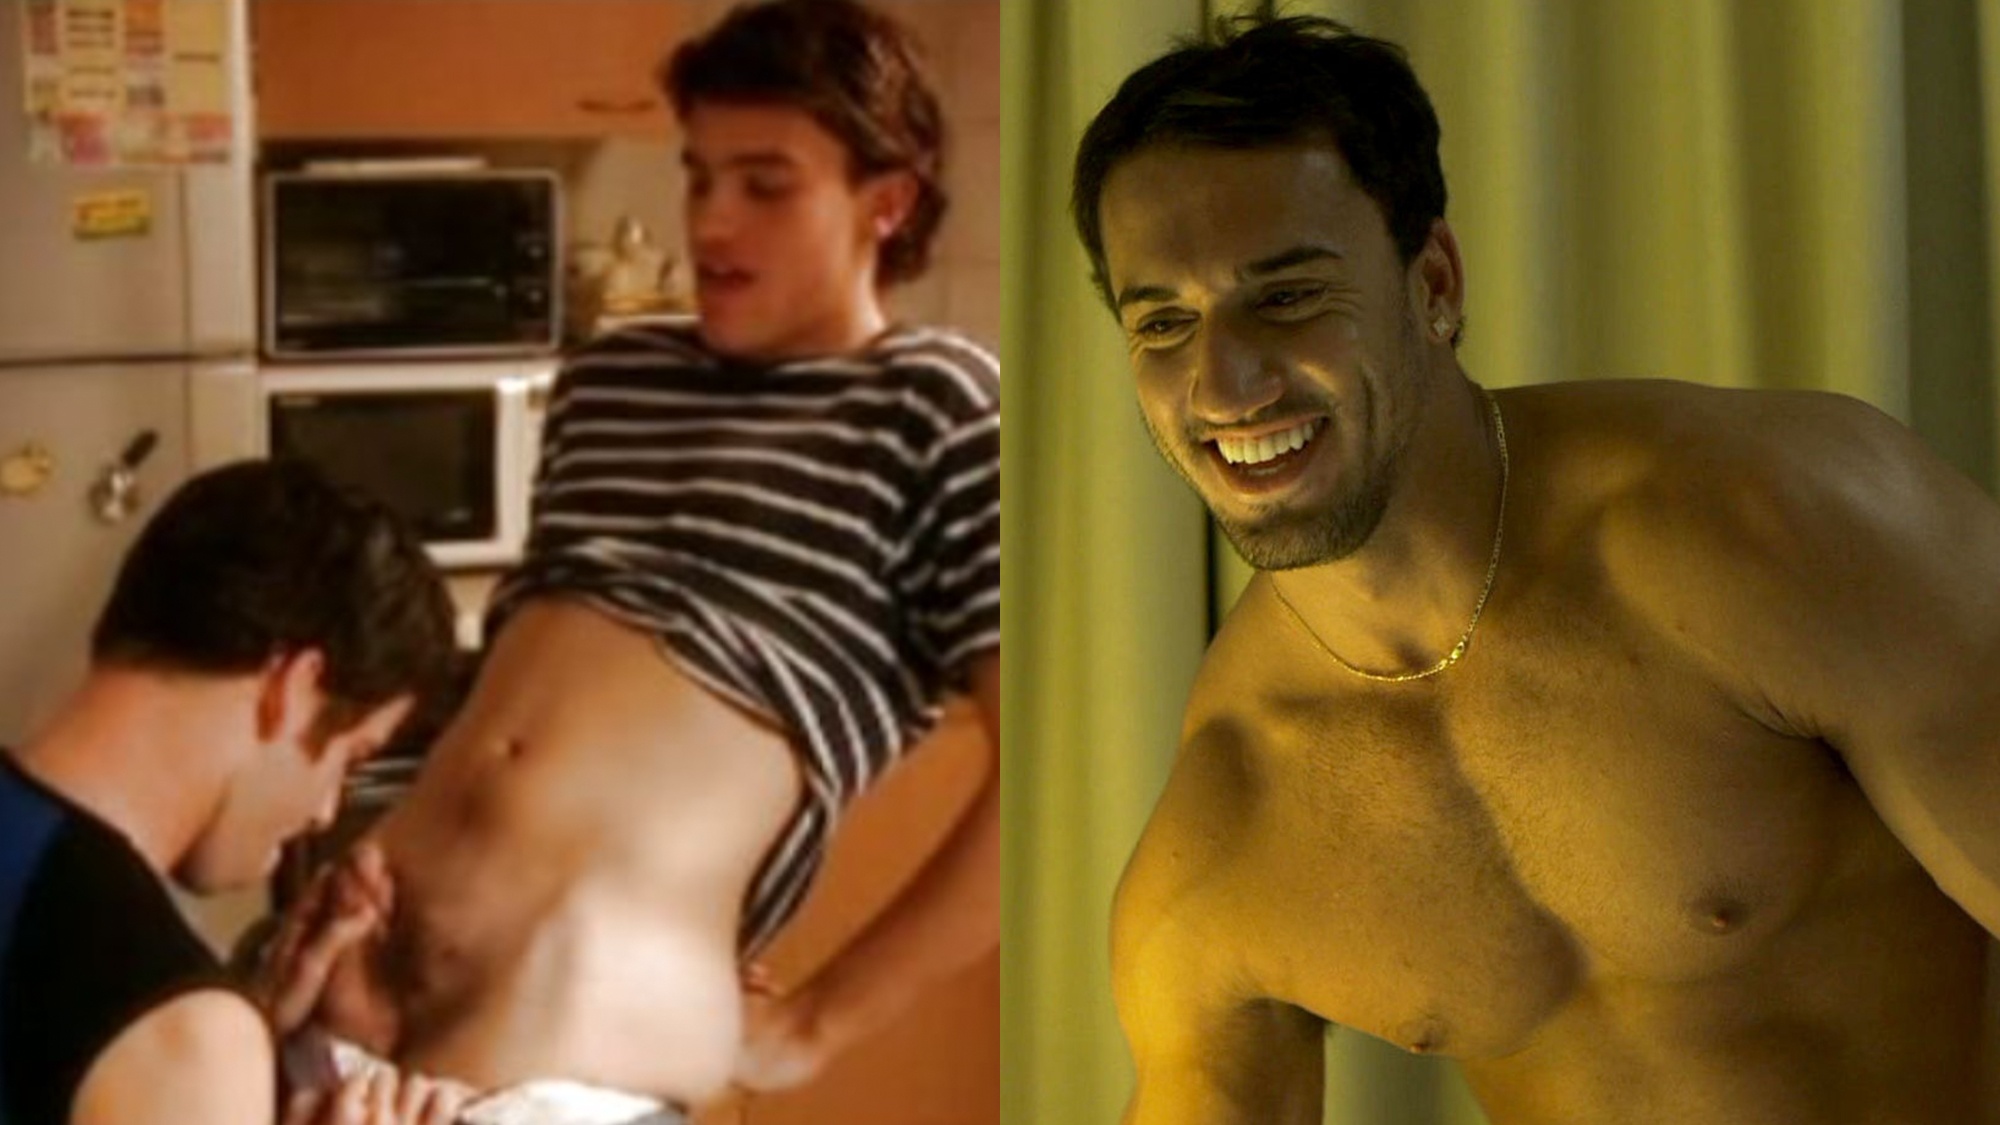 From headshots to bedshots: the sexiest male actors in the nude